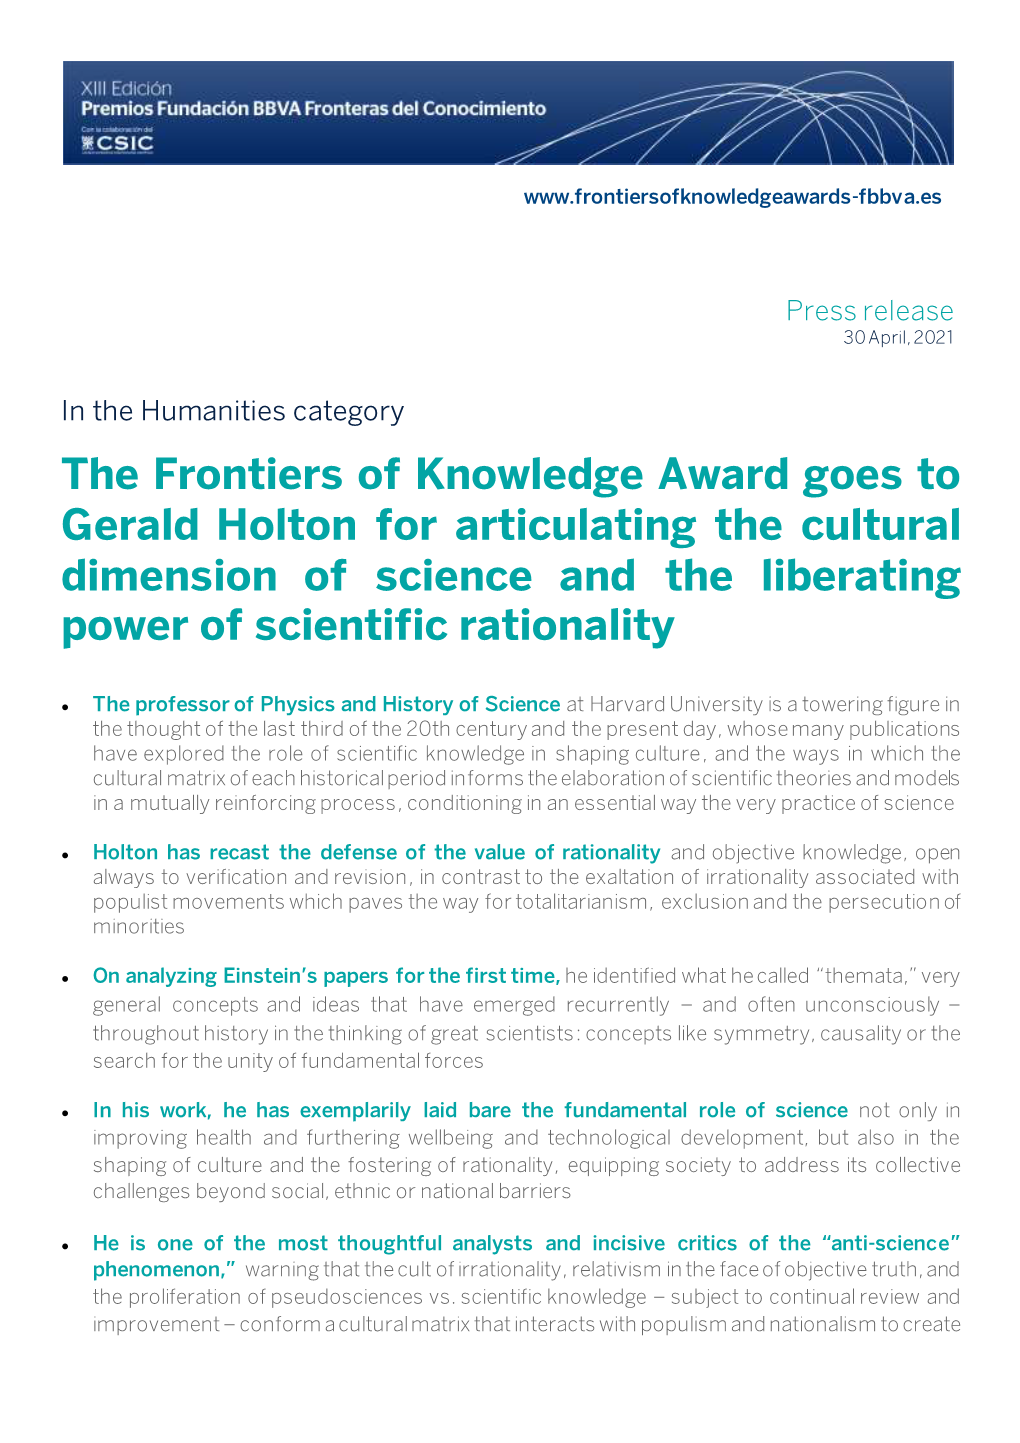 The Frontiers of Knowledge Award Goes to Gerald Holton for Articulating the Cultural Dimension of Science and the Liberating Power of Scientific Rationality